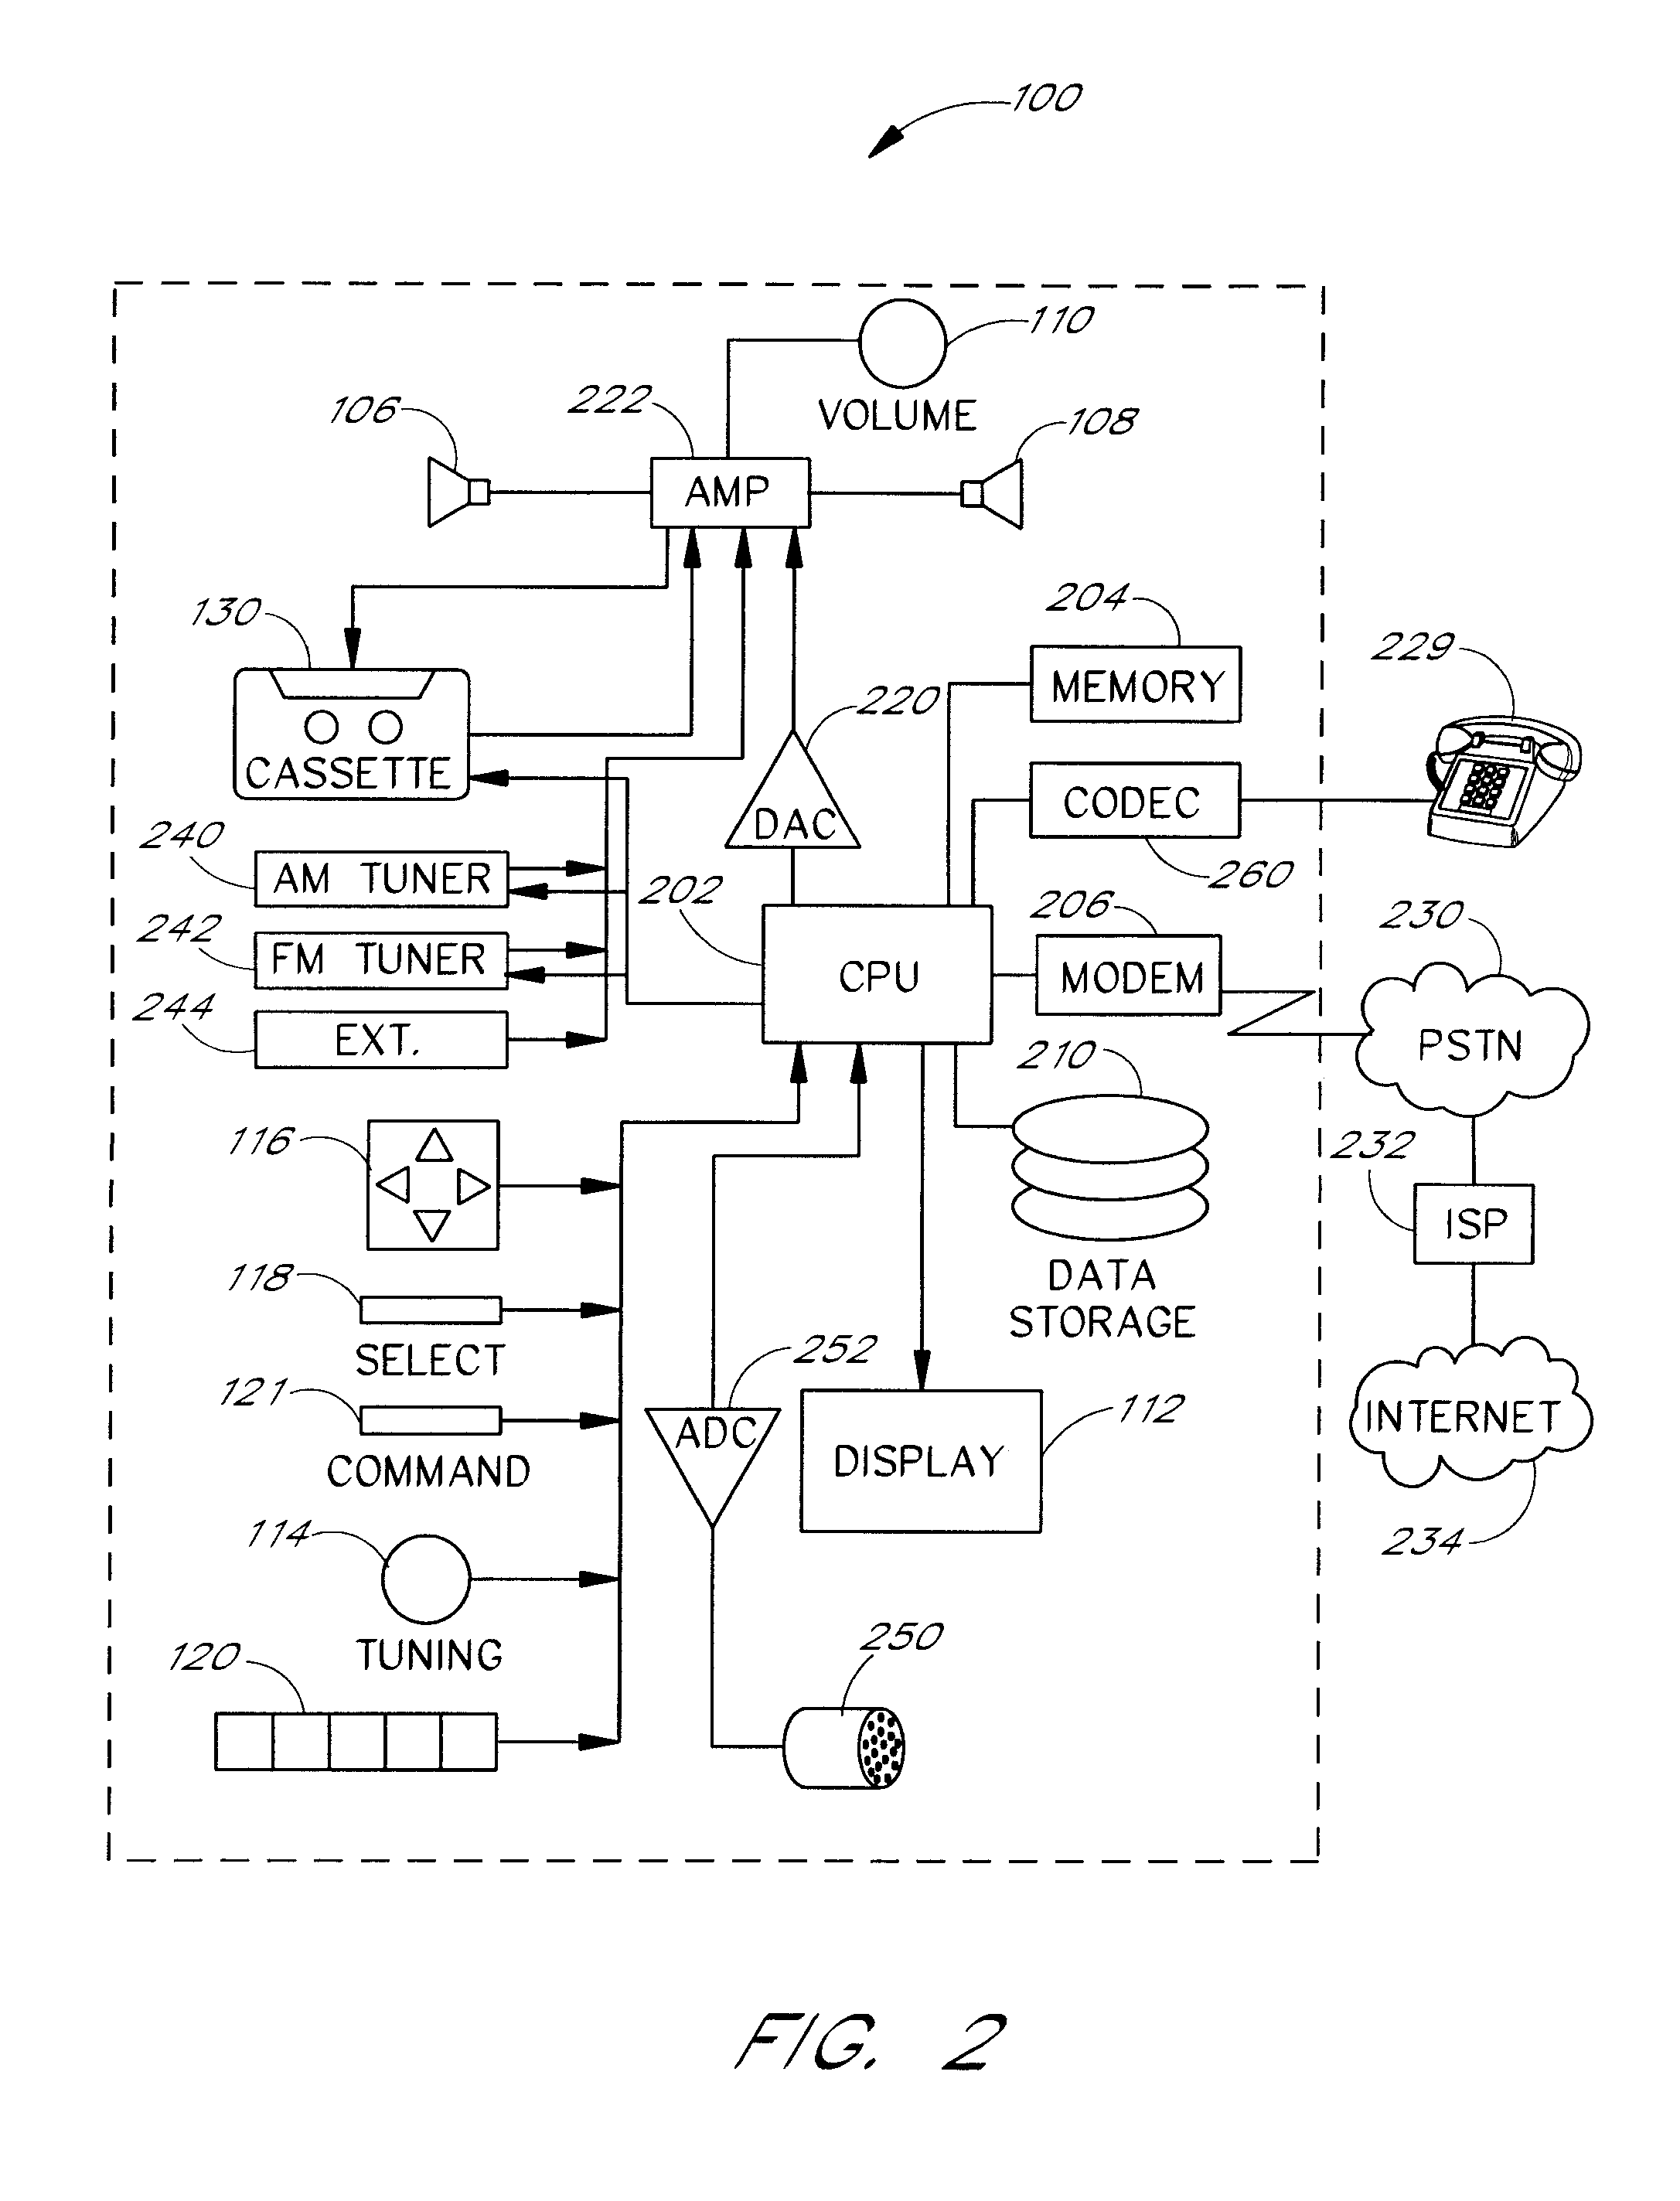 Network-enabled audio device and radio site